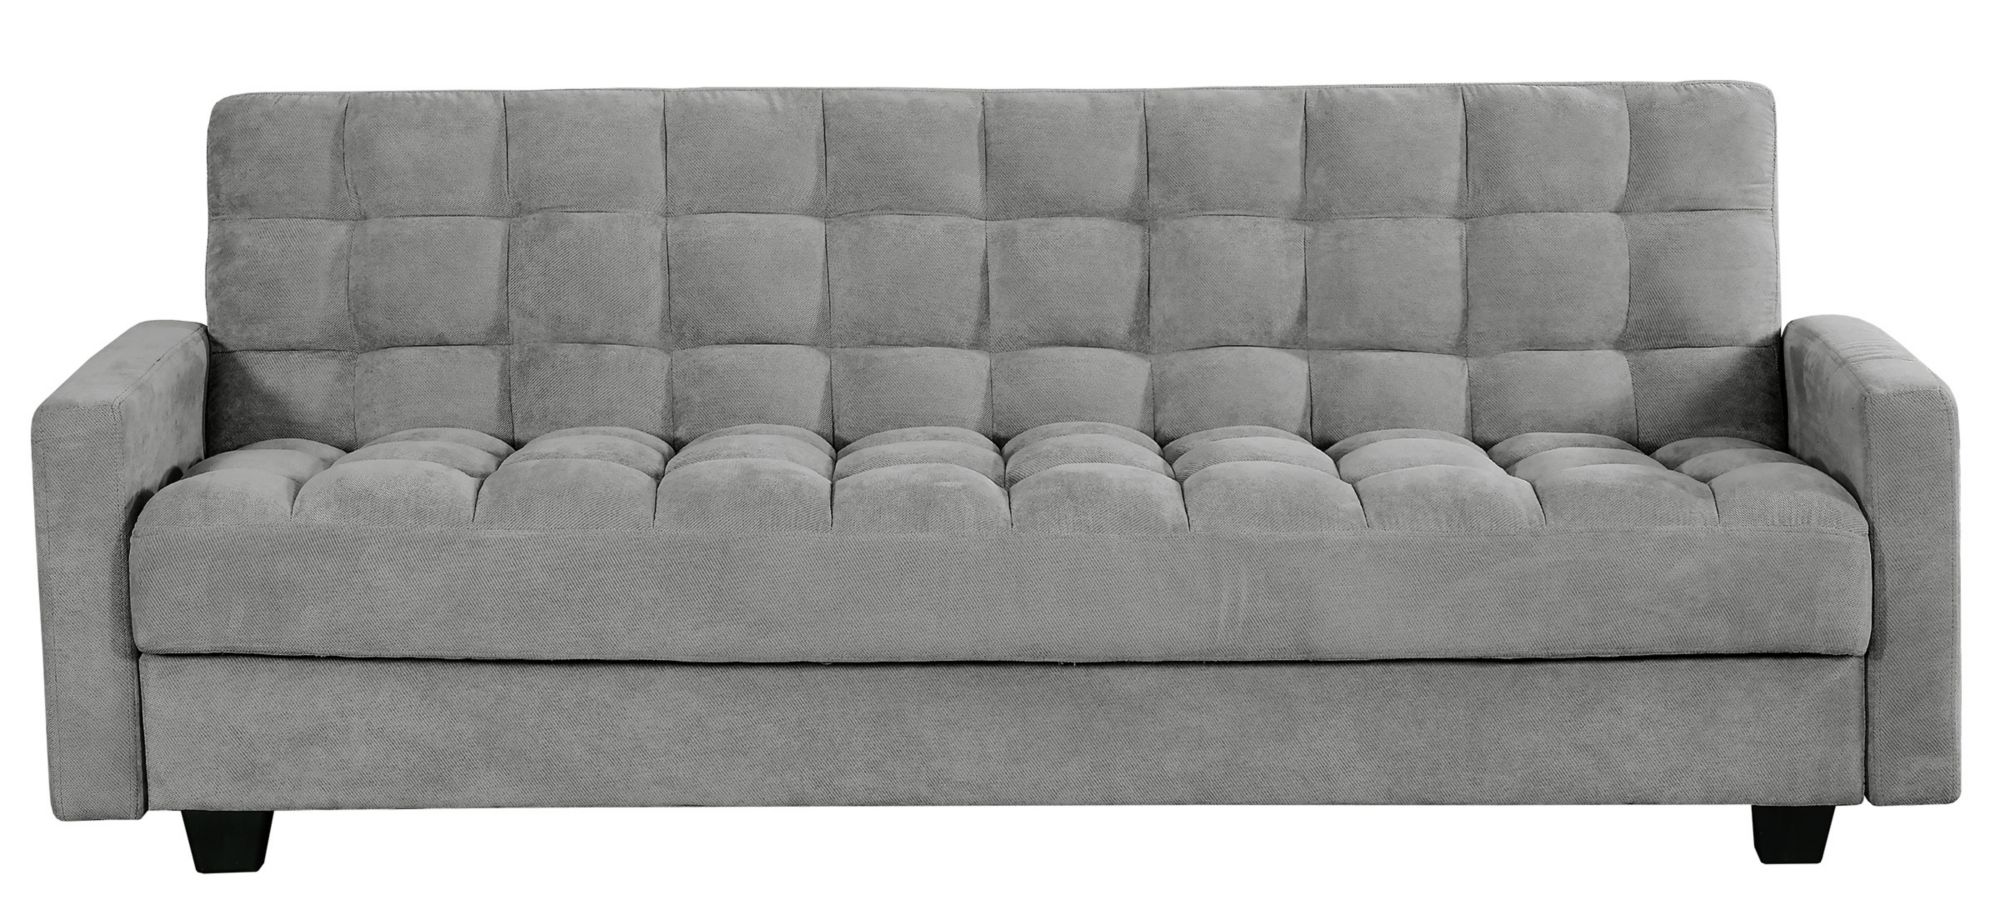 Penelope Tufted Sleeper Sofa with Storage in Tulli Ash by Primo International